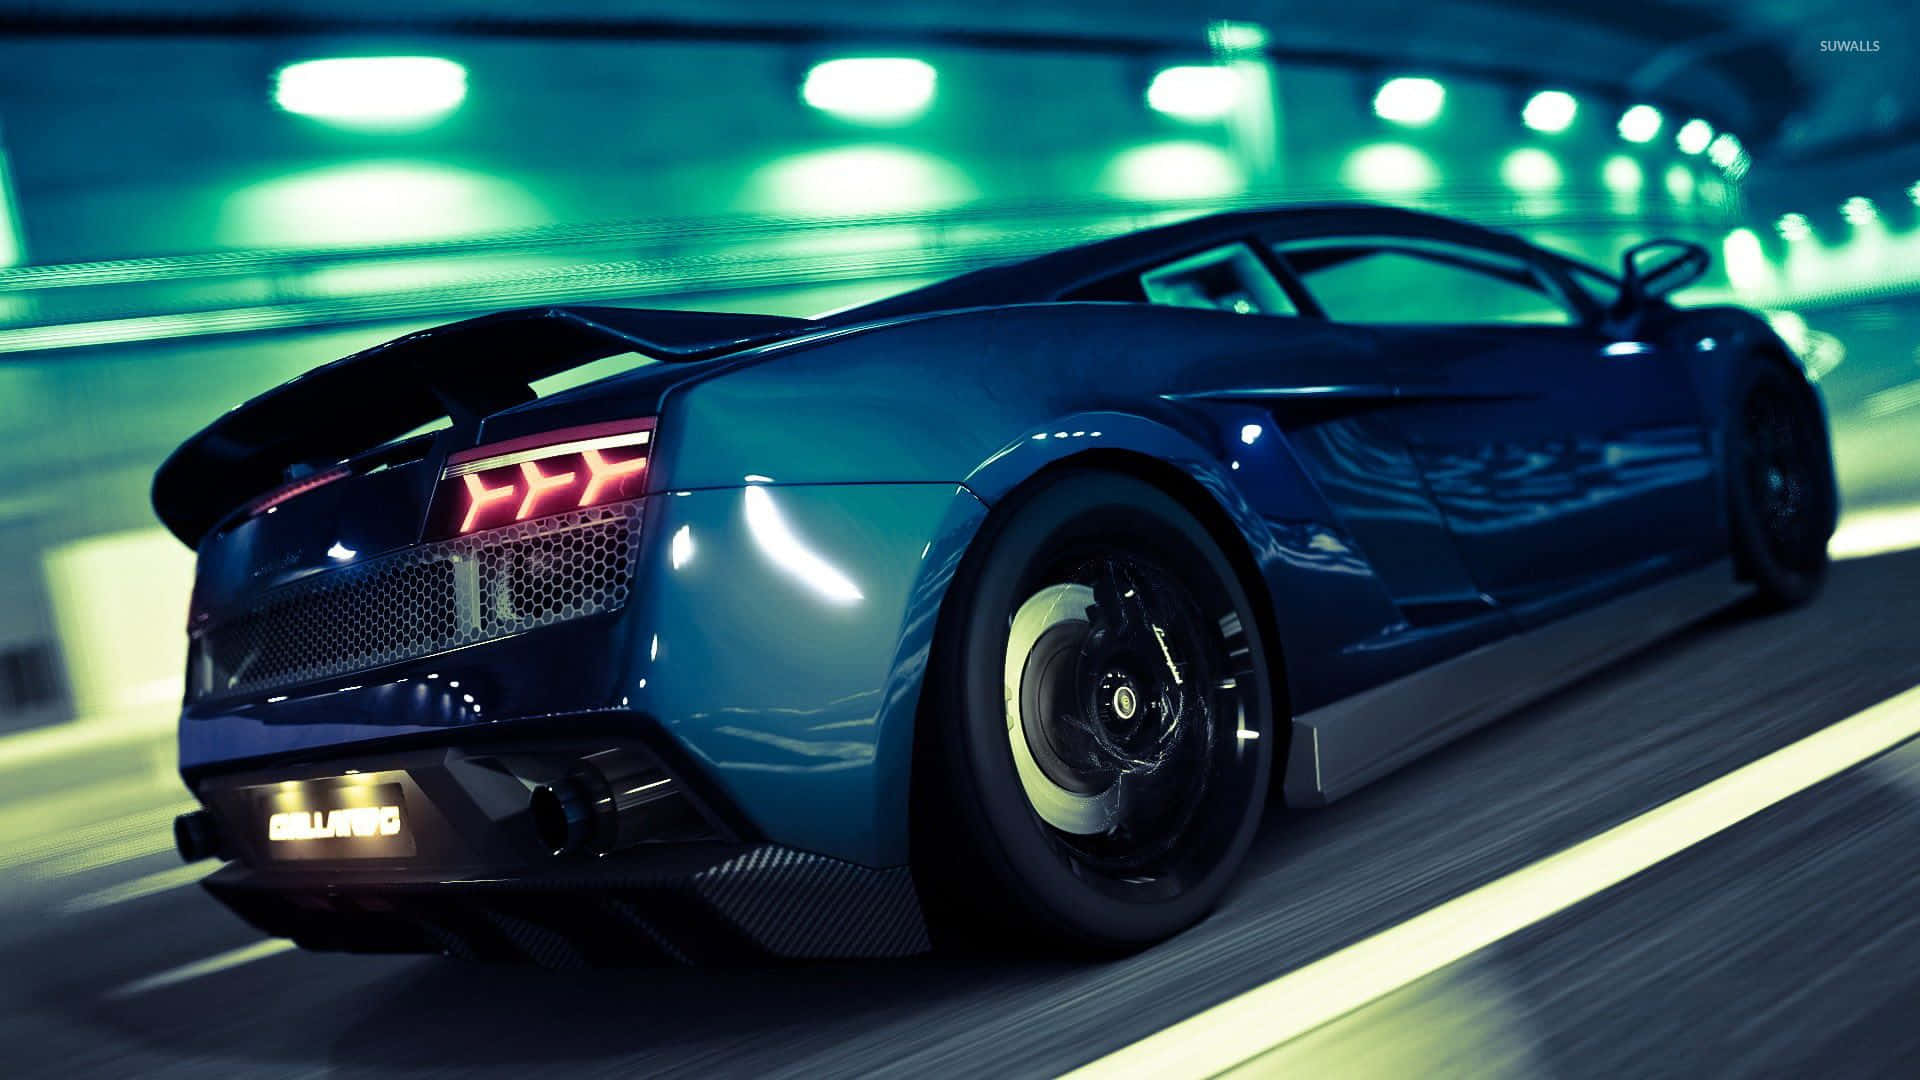 Sleek and sexy, the Blue Lamborghini Aventador stands out among the competition. Wallpaper